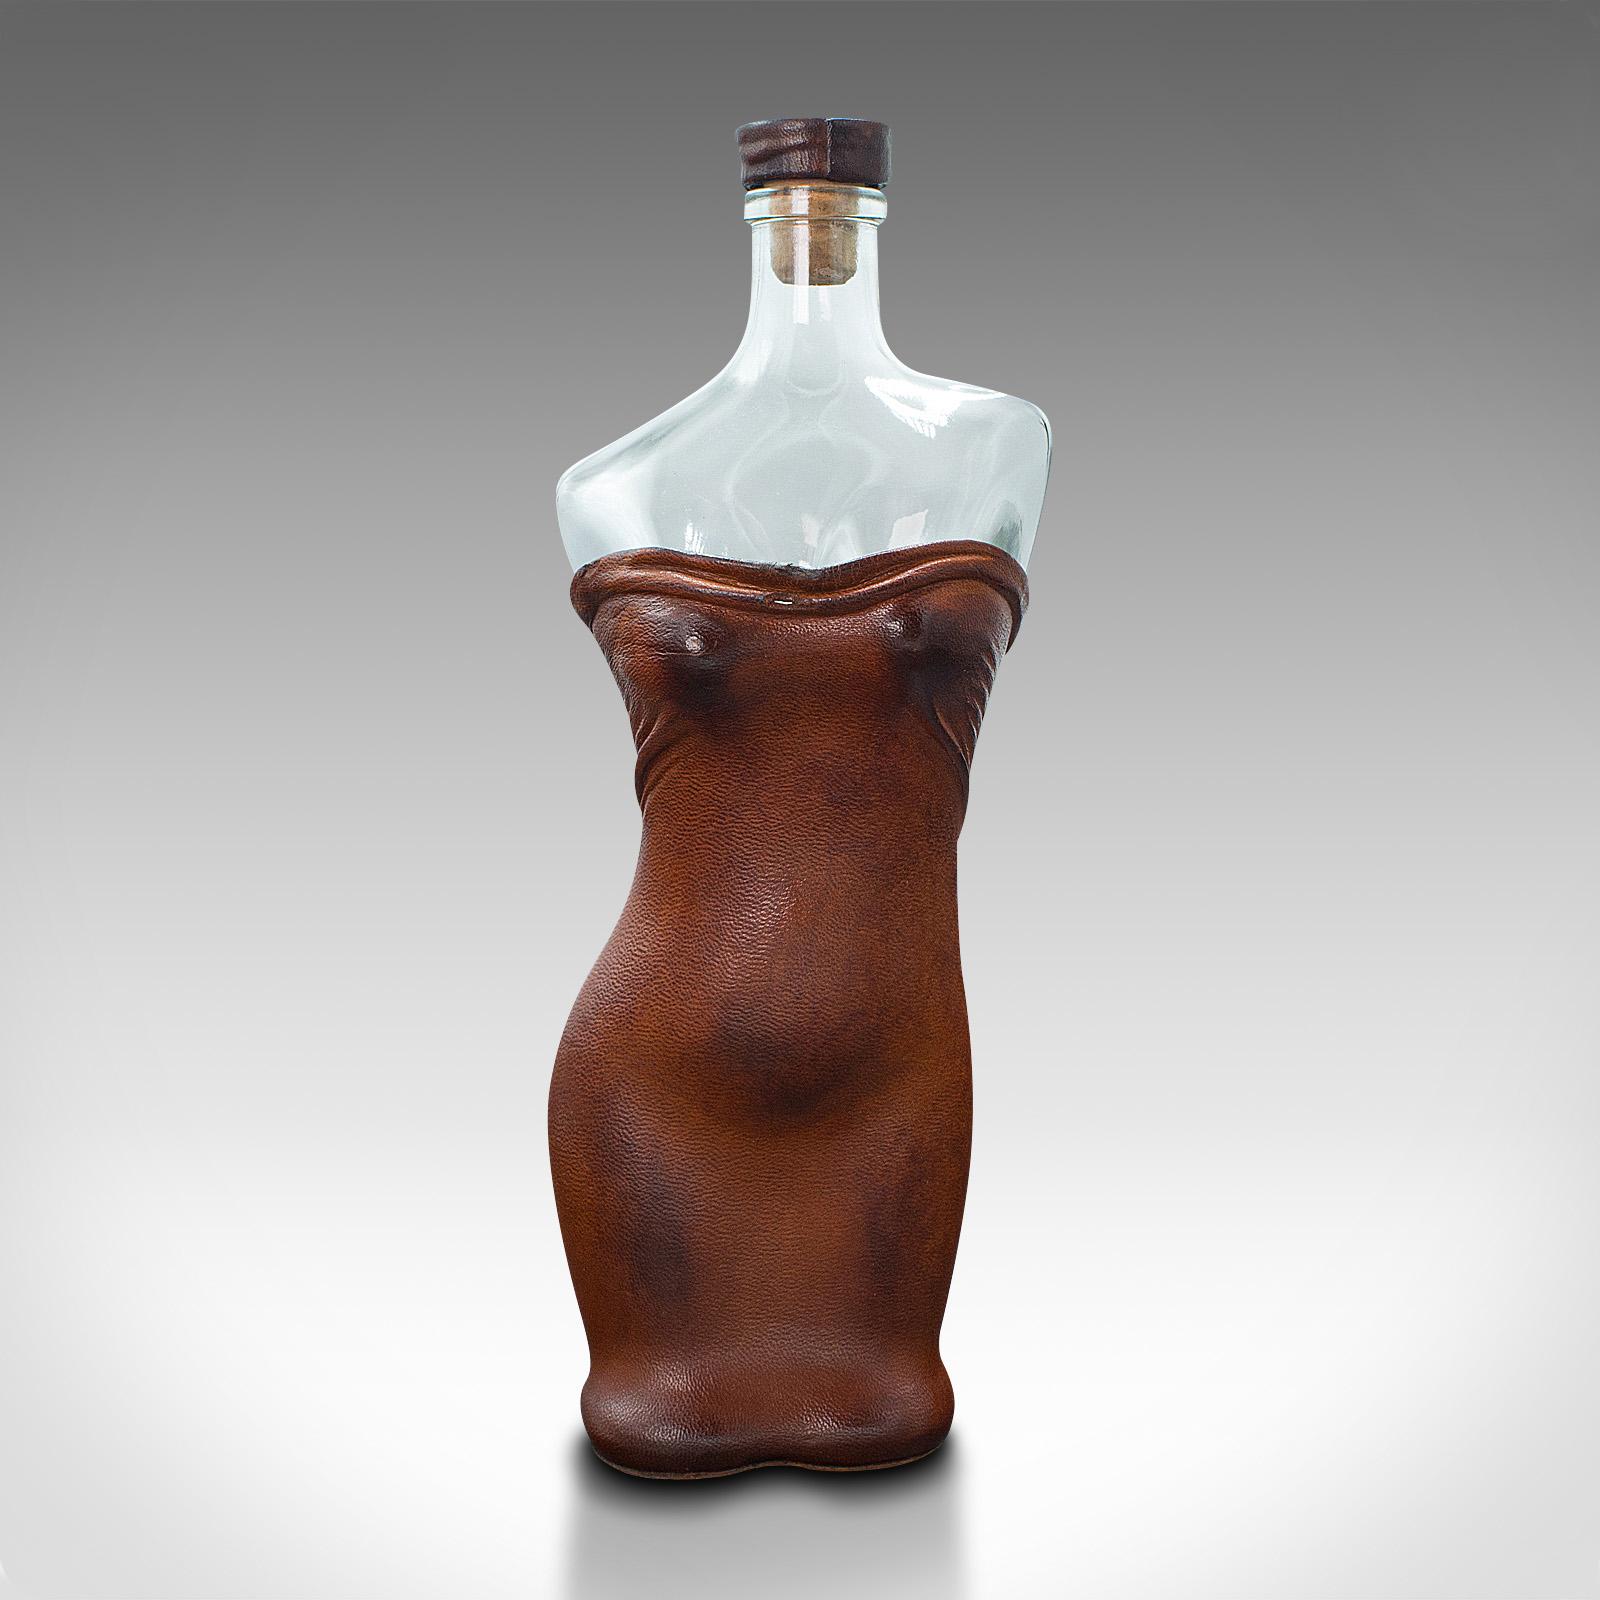 This is a set of two vintage couture spirit bottles. A French, glass and leather wine vessel in the female form, dating to the early 20th century, circa 1930.

Delightfully feminine, with fascinating leather dressings
Displaying a desirable aged